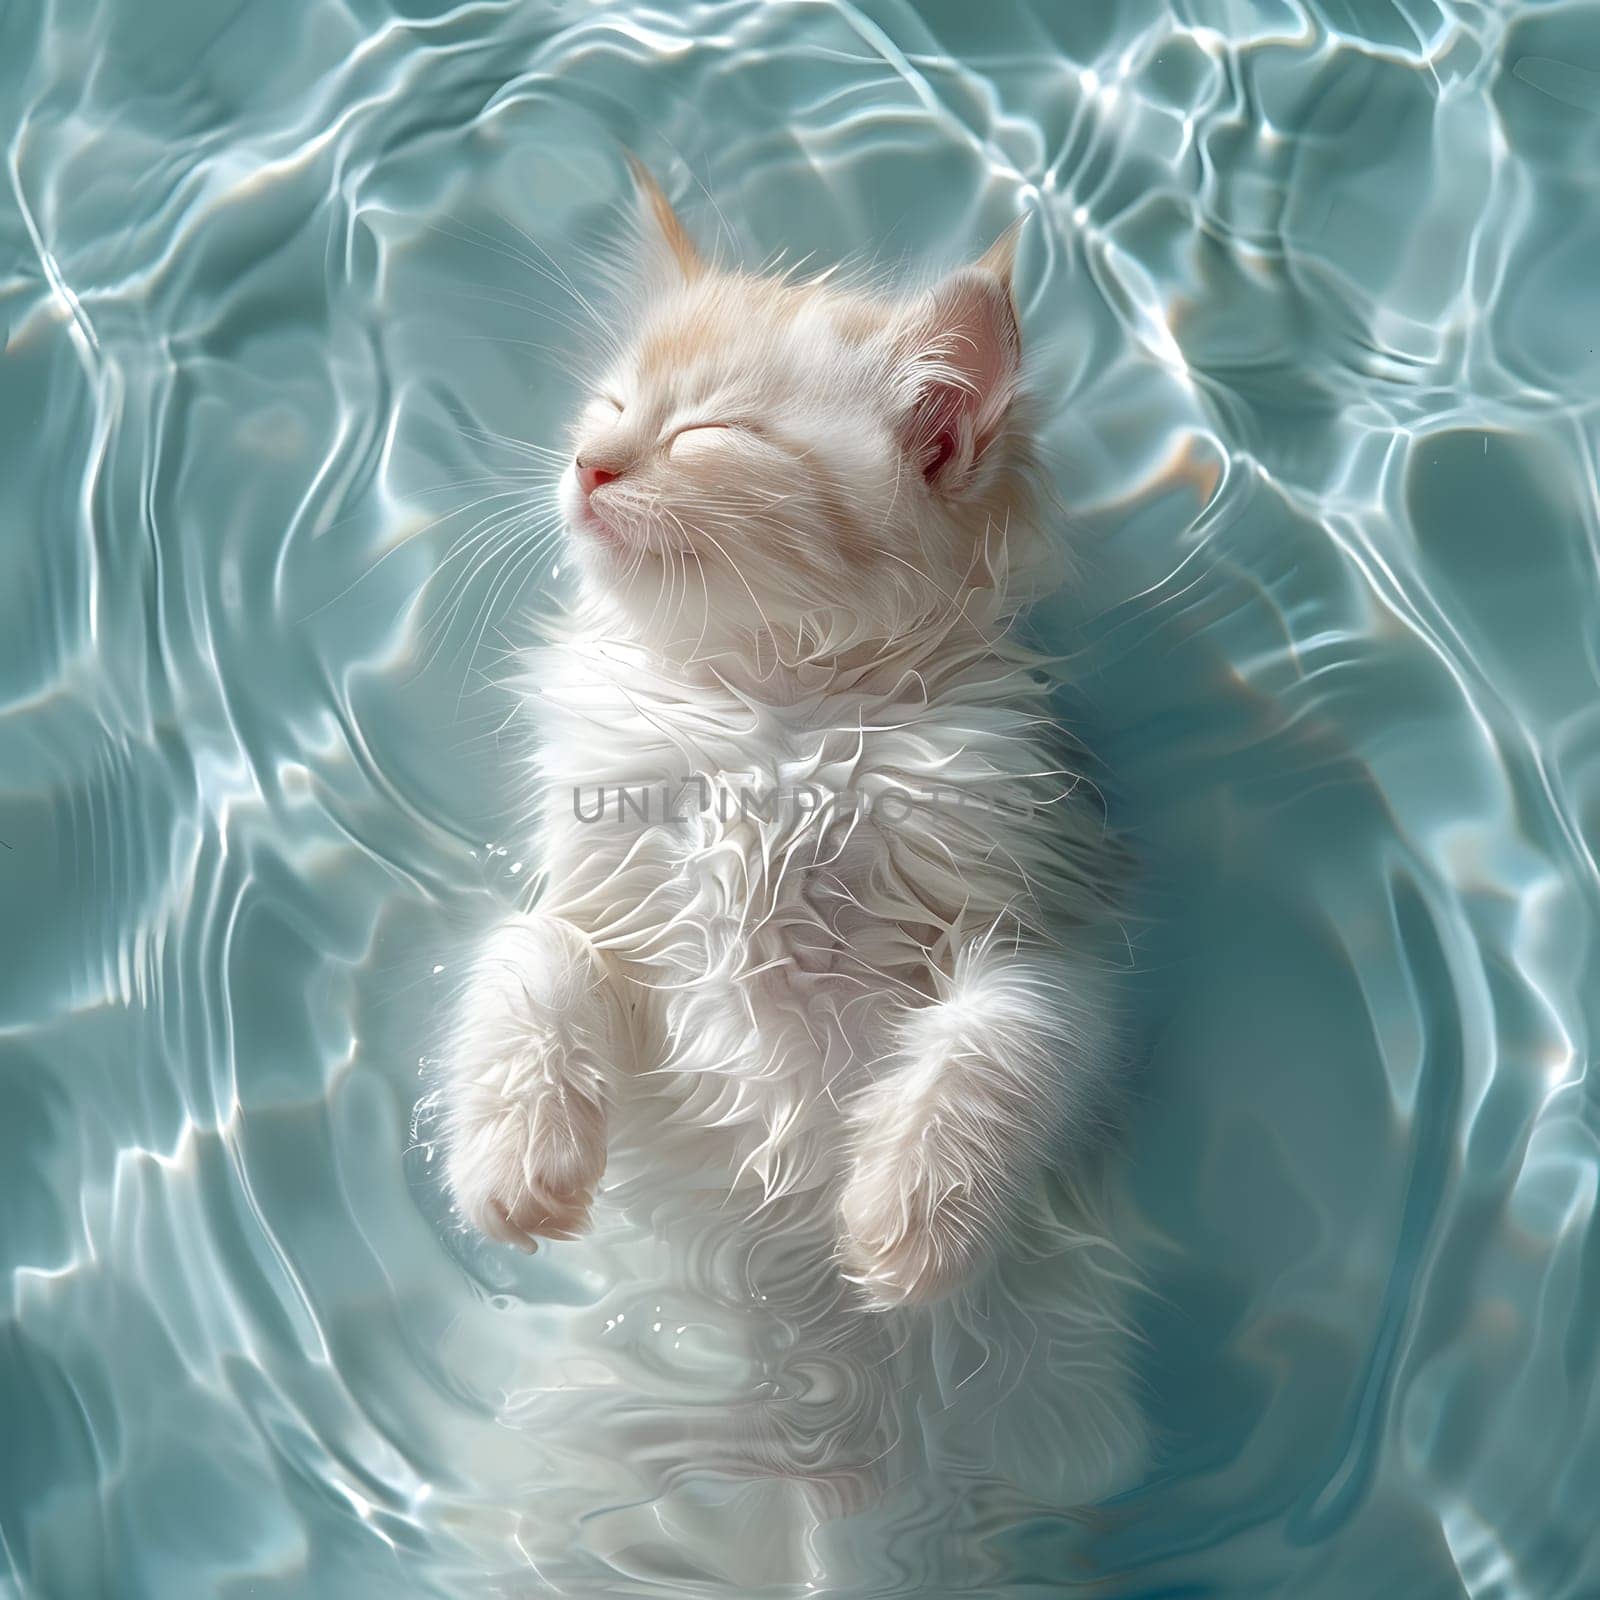 A small Felidae organism, a carnivore known as a kitten, floating in the fluid with its eyes closed, whiskers and fawn fur visible